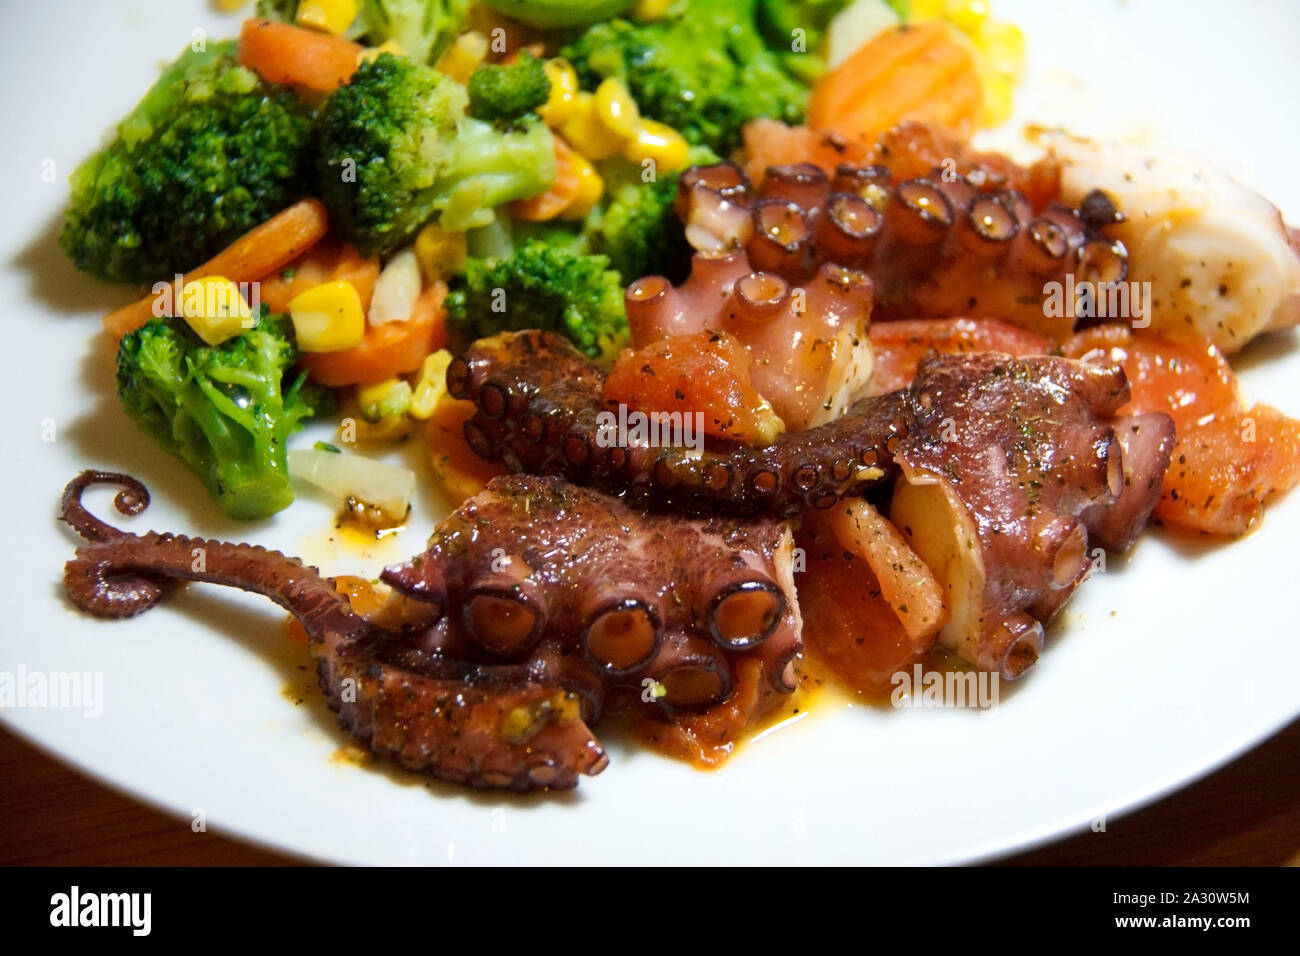 Ready to eat octopus with vegetables on a plate Stock Photo